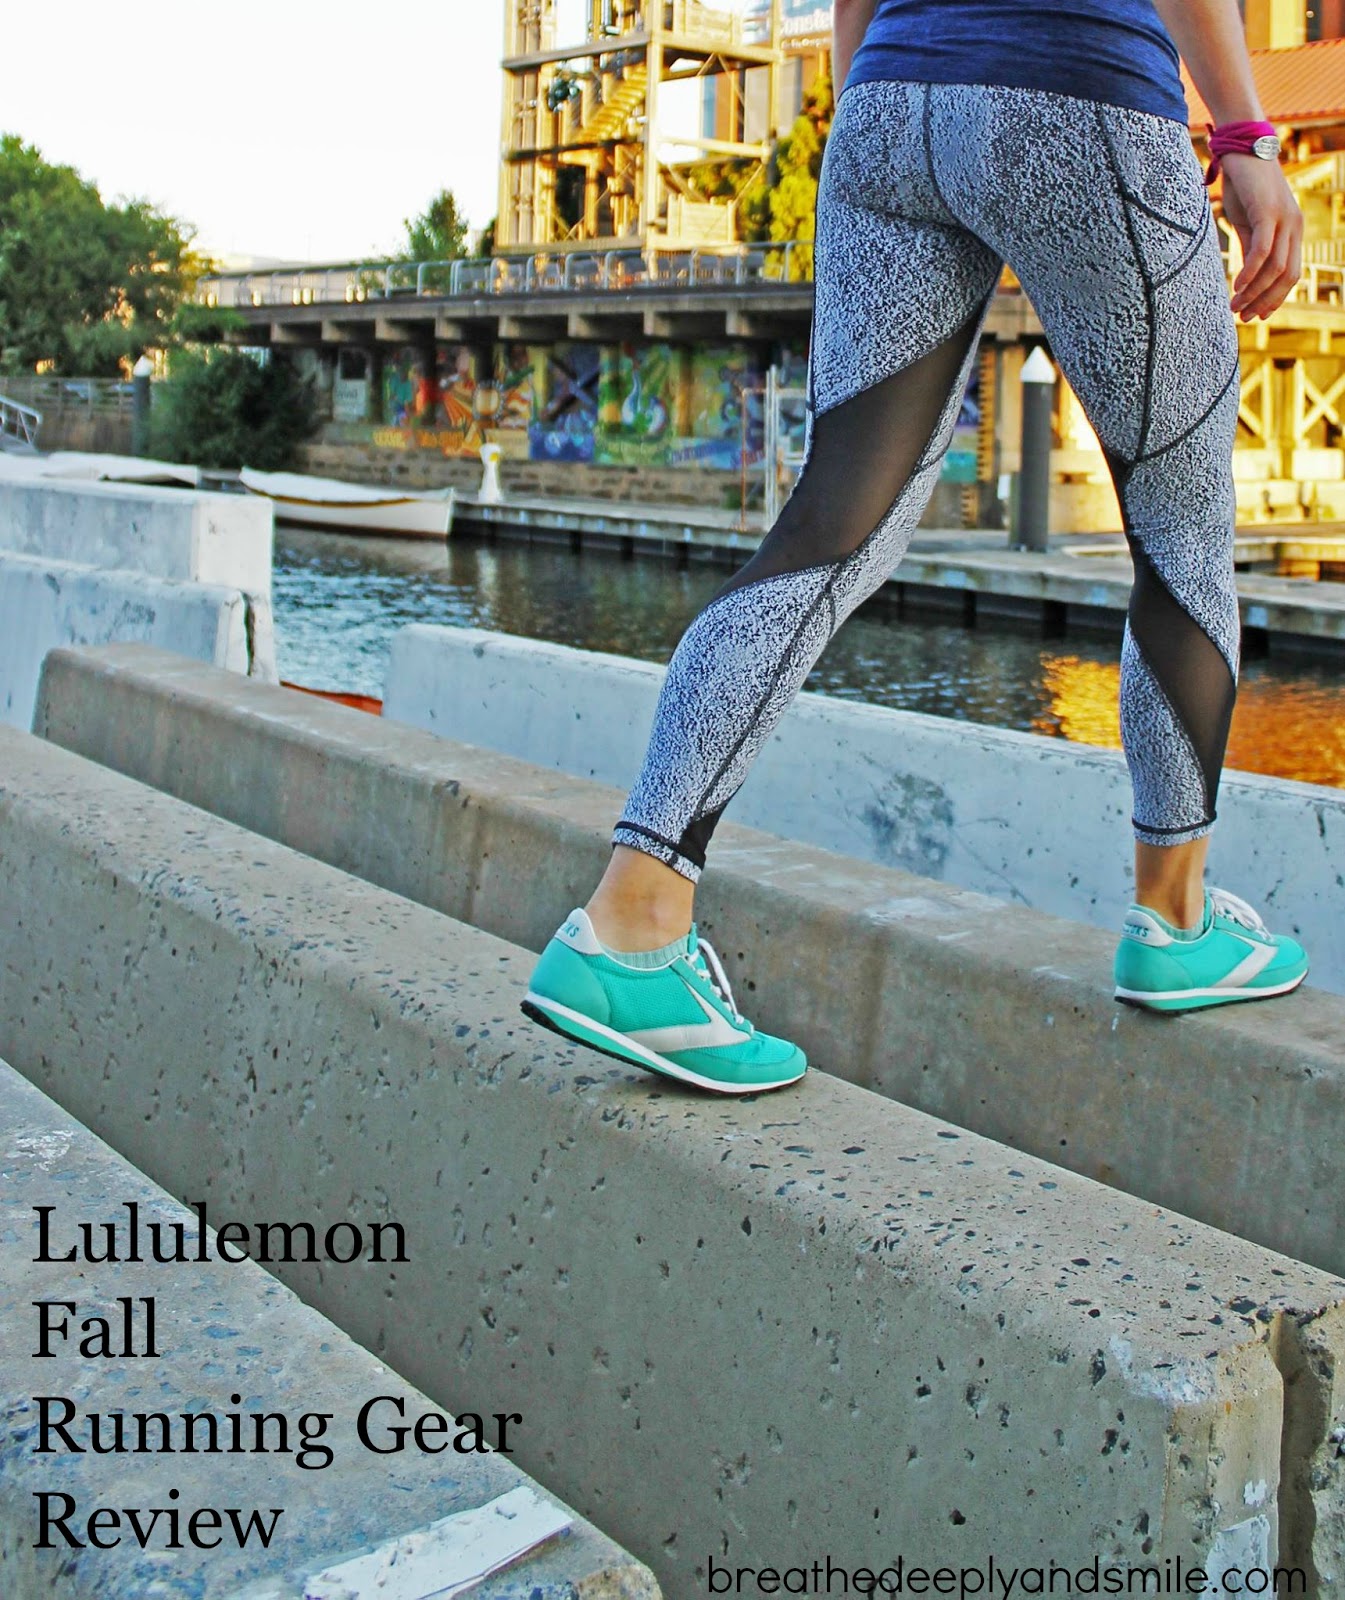 Breathe Deeply and Smile: Running into Fall with Lululemon {gear